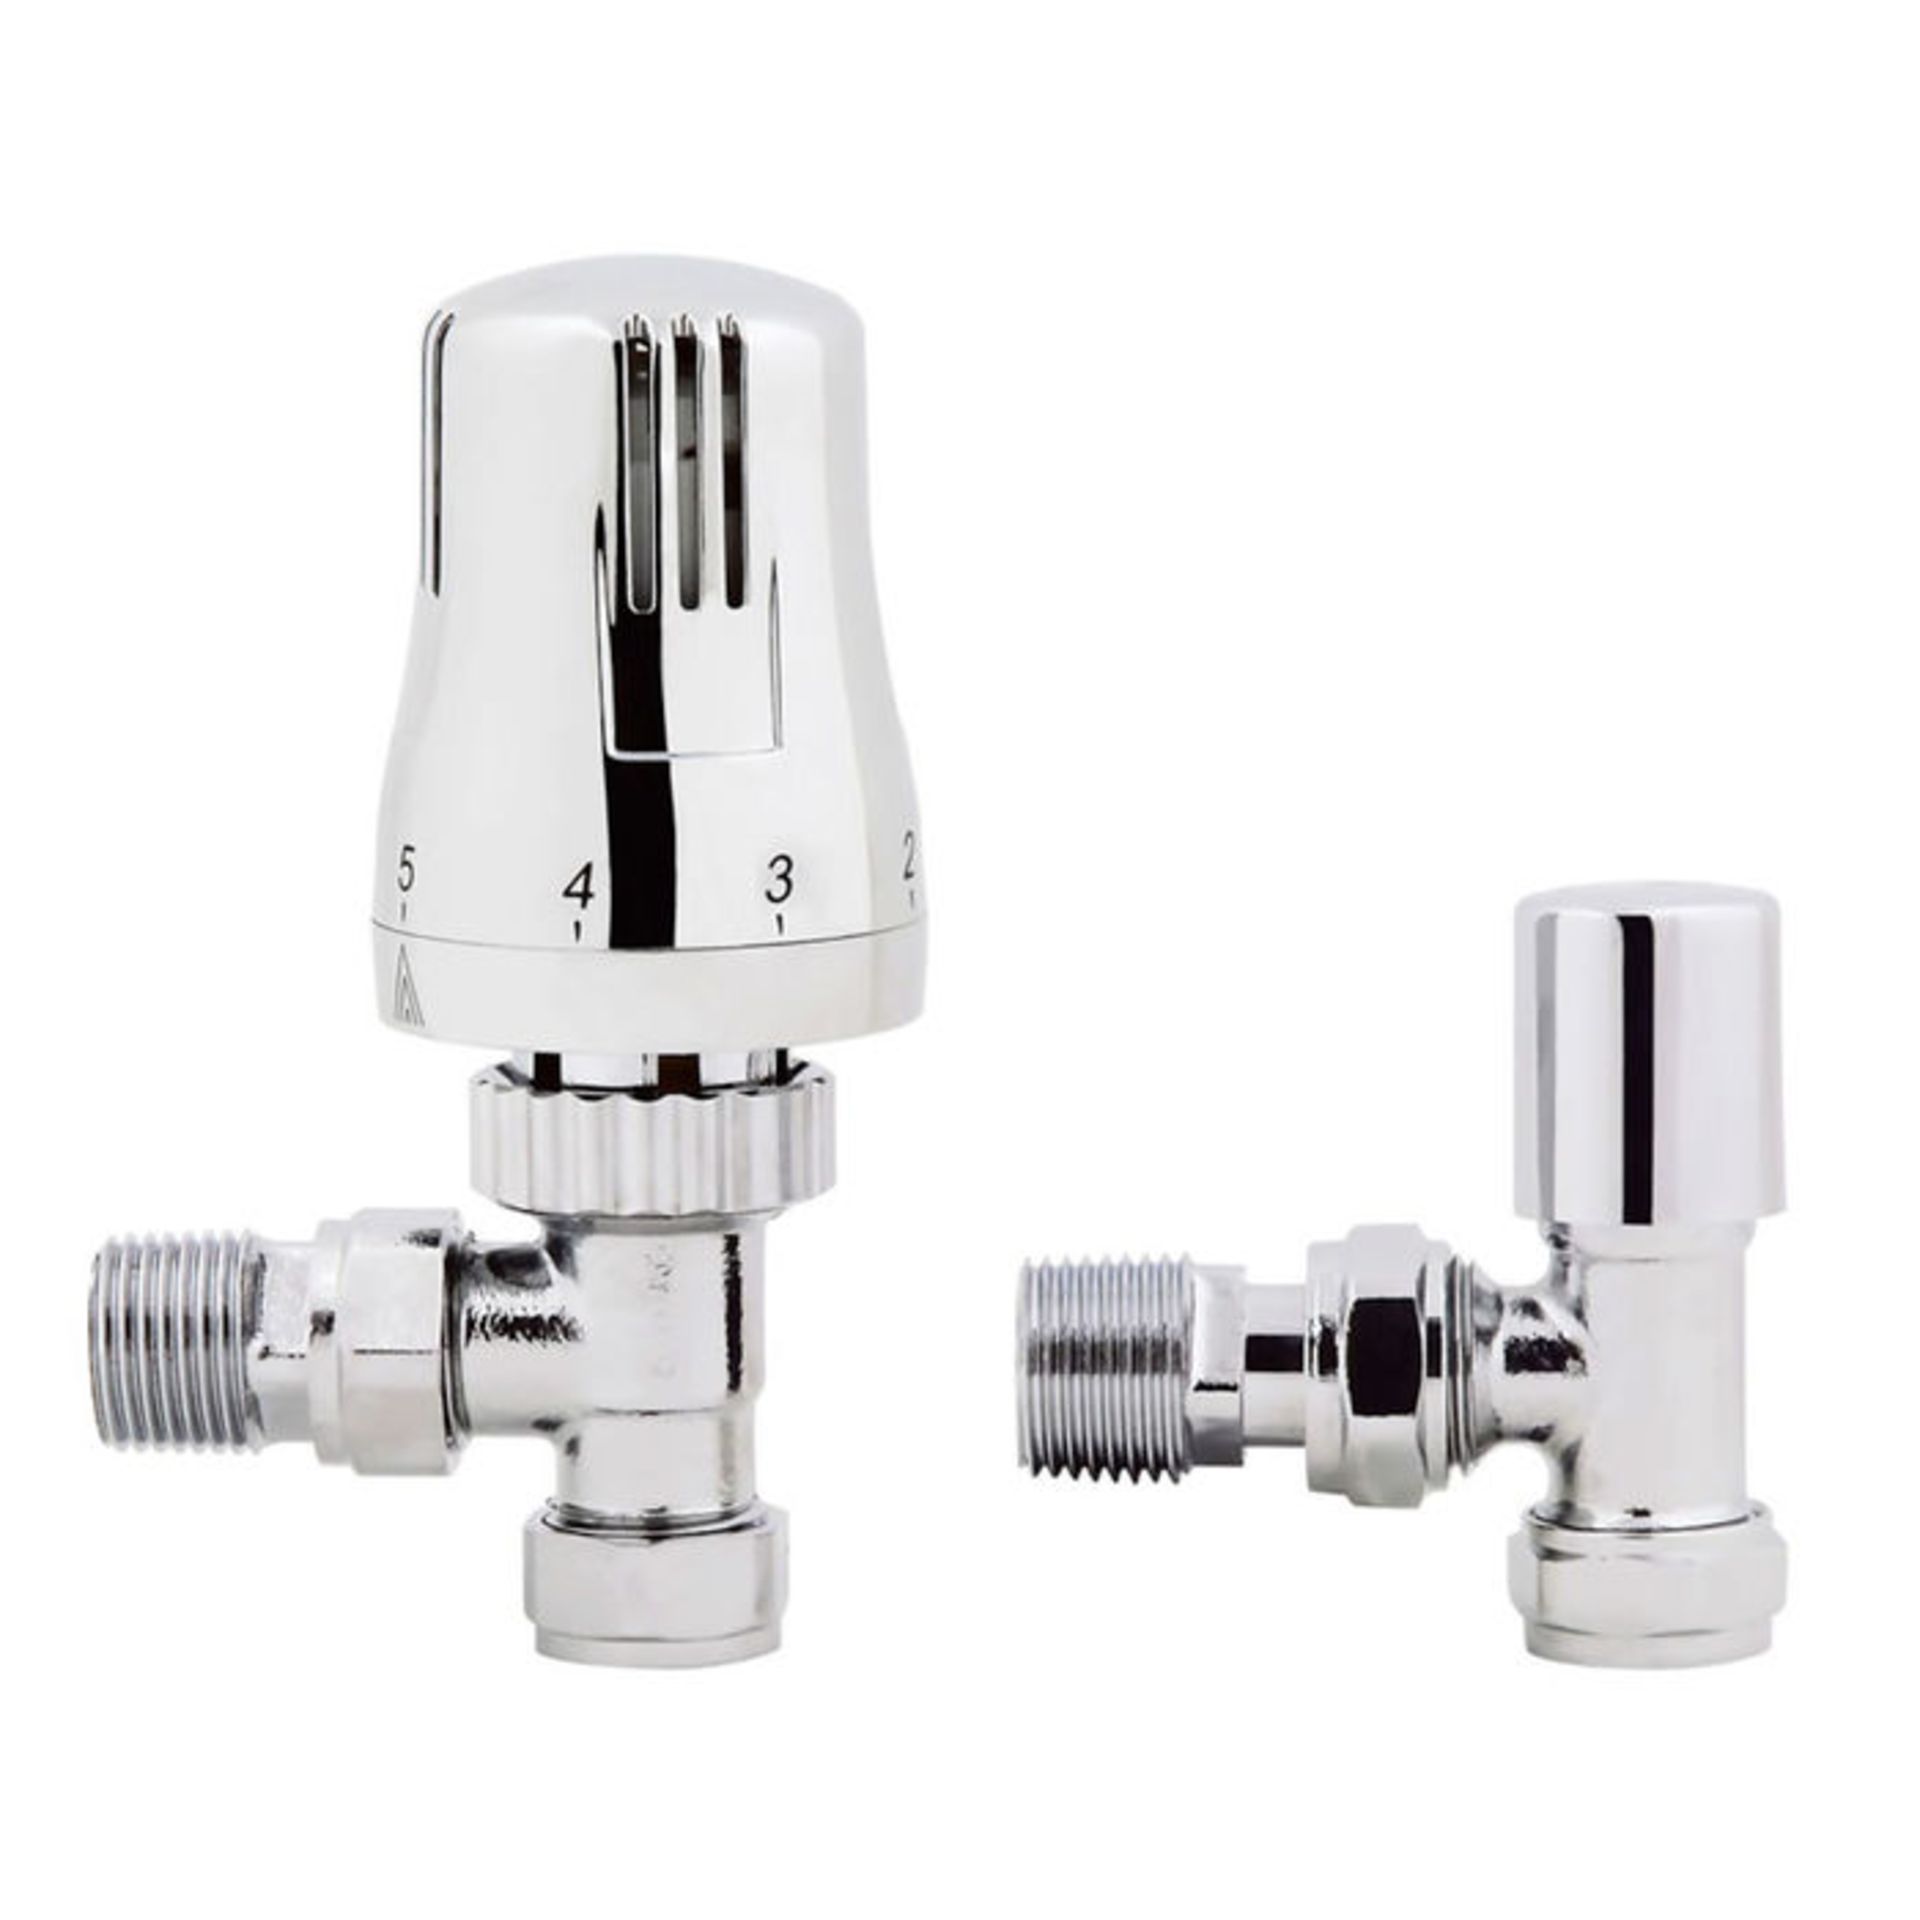 (GR40) 15mm Standard Connection Thermostatic Angled Chrome Radiator Valves Chrome Plated Solid Brass